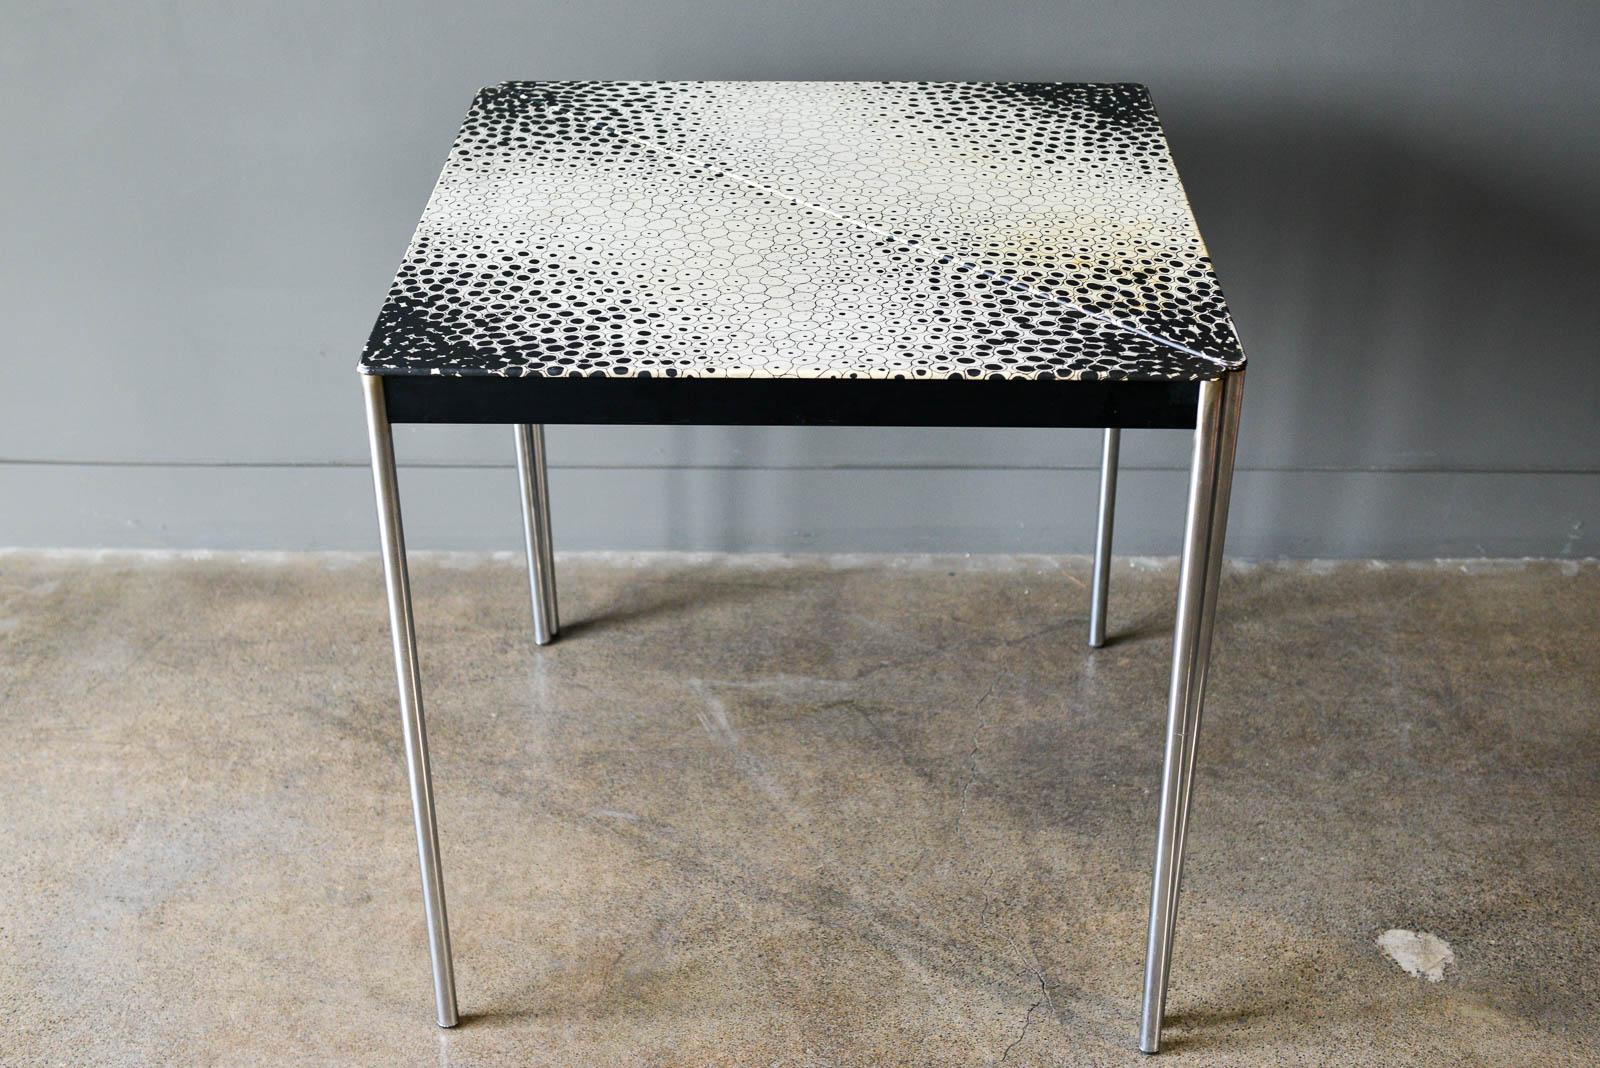 Vintage modular console or square table. 2 pieces can be configured any way you like. Covered in a great black and quote pattern.

Measure: 36